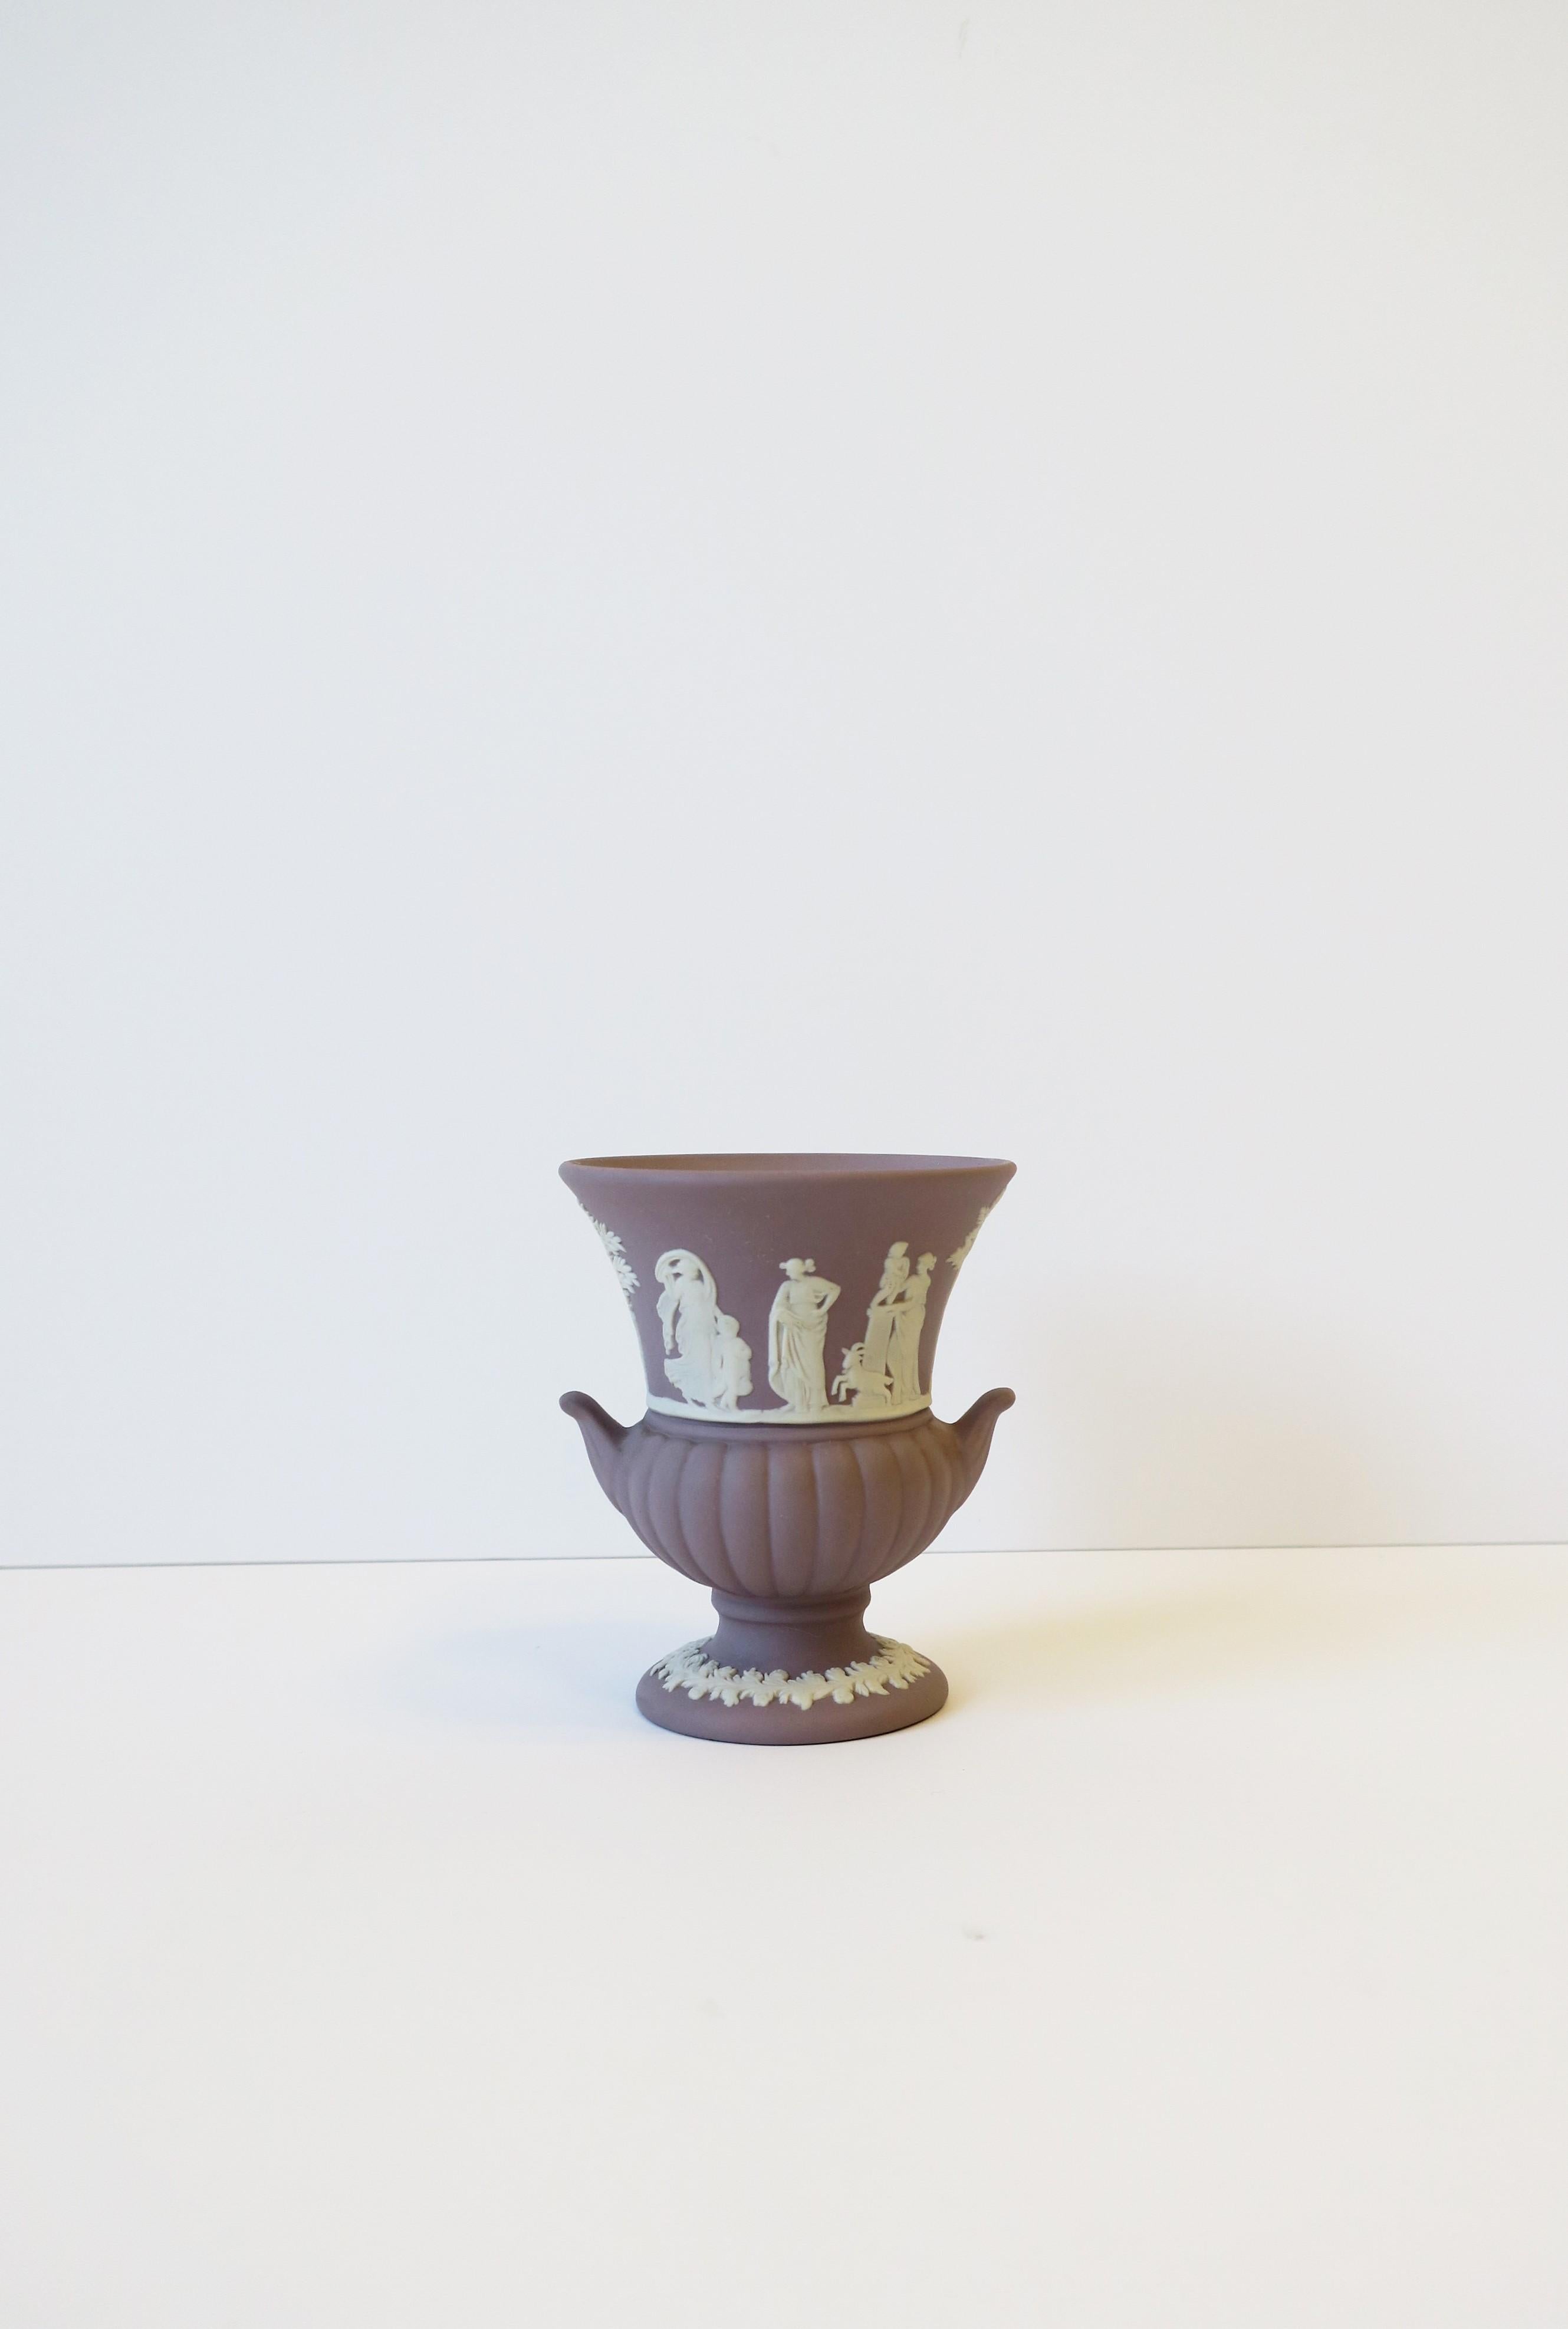 A beautiful, small, English Wedgwood Jasperware urn vase in the neoclassical design style, circa 20th century, England. Piece is a matte stoneware in a light lavender purple with a white neoclassical raised relief around center, a leaf design at